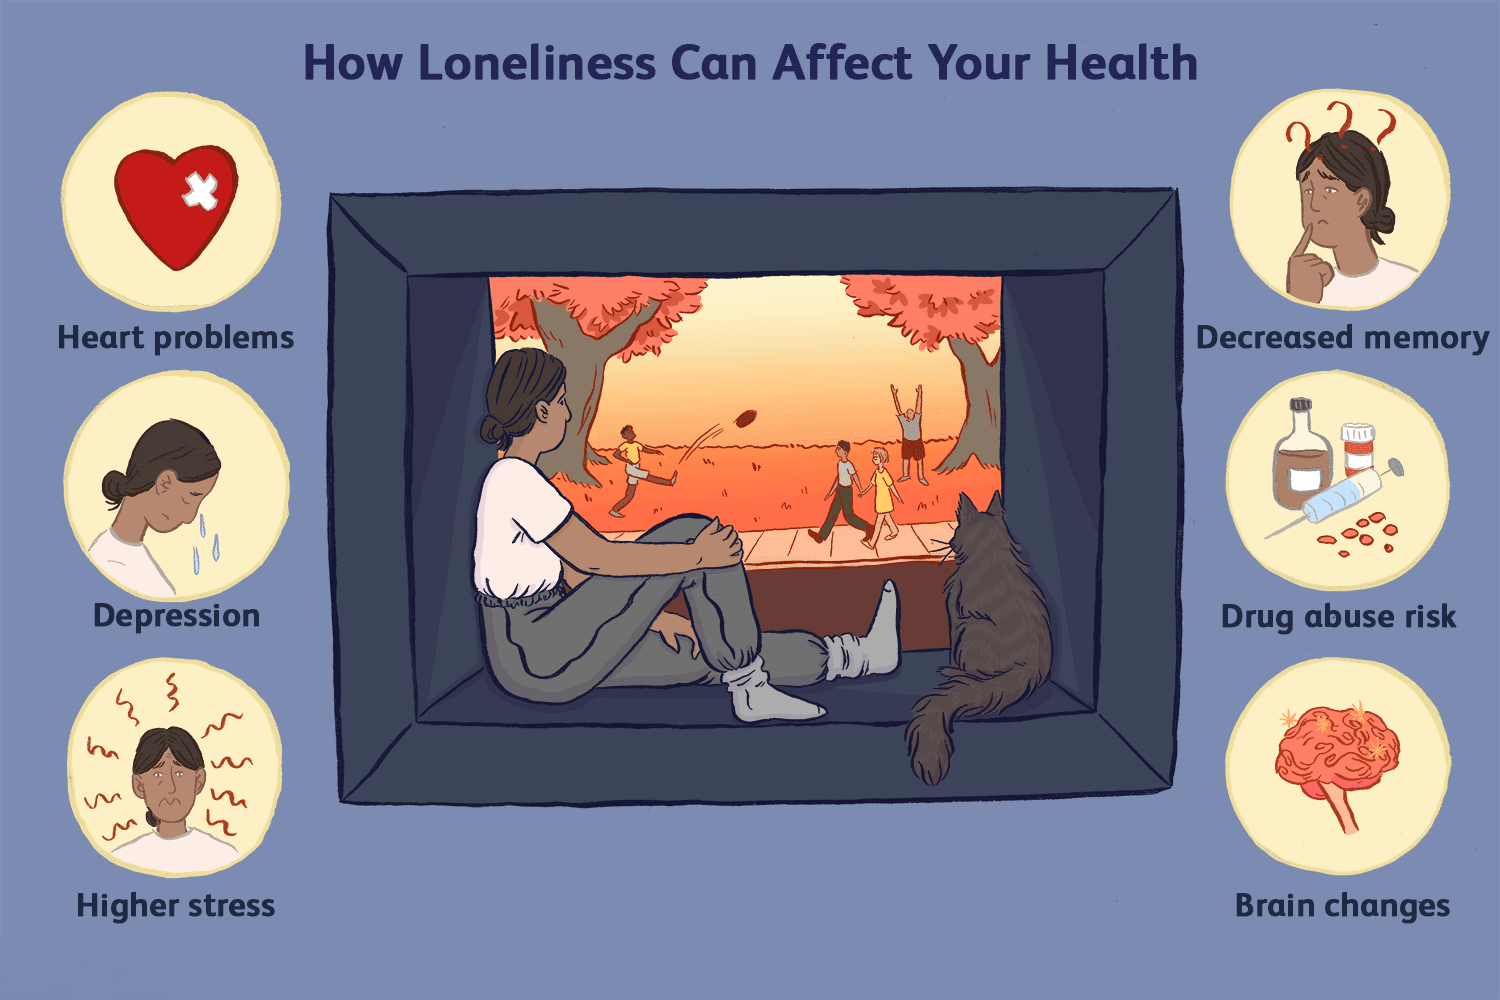 How Loneliness Can Affect Your Health